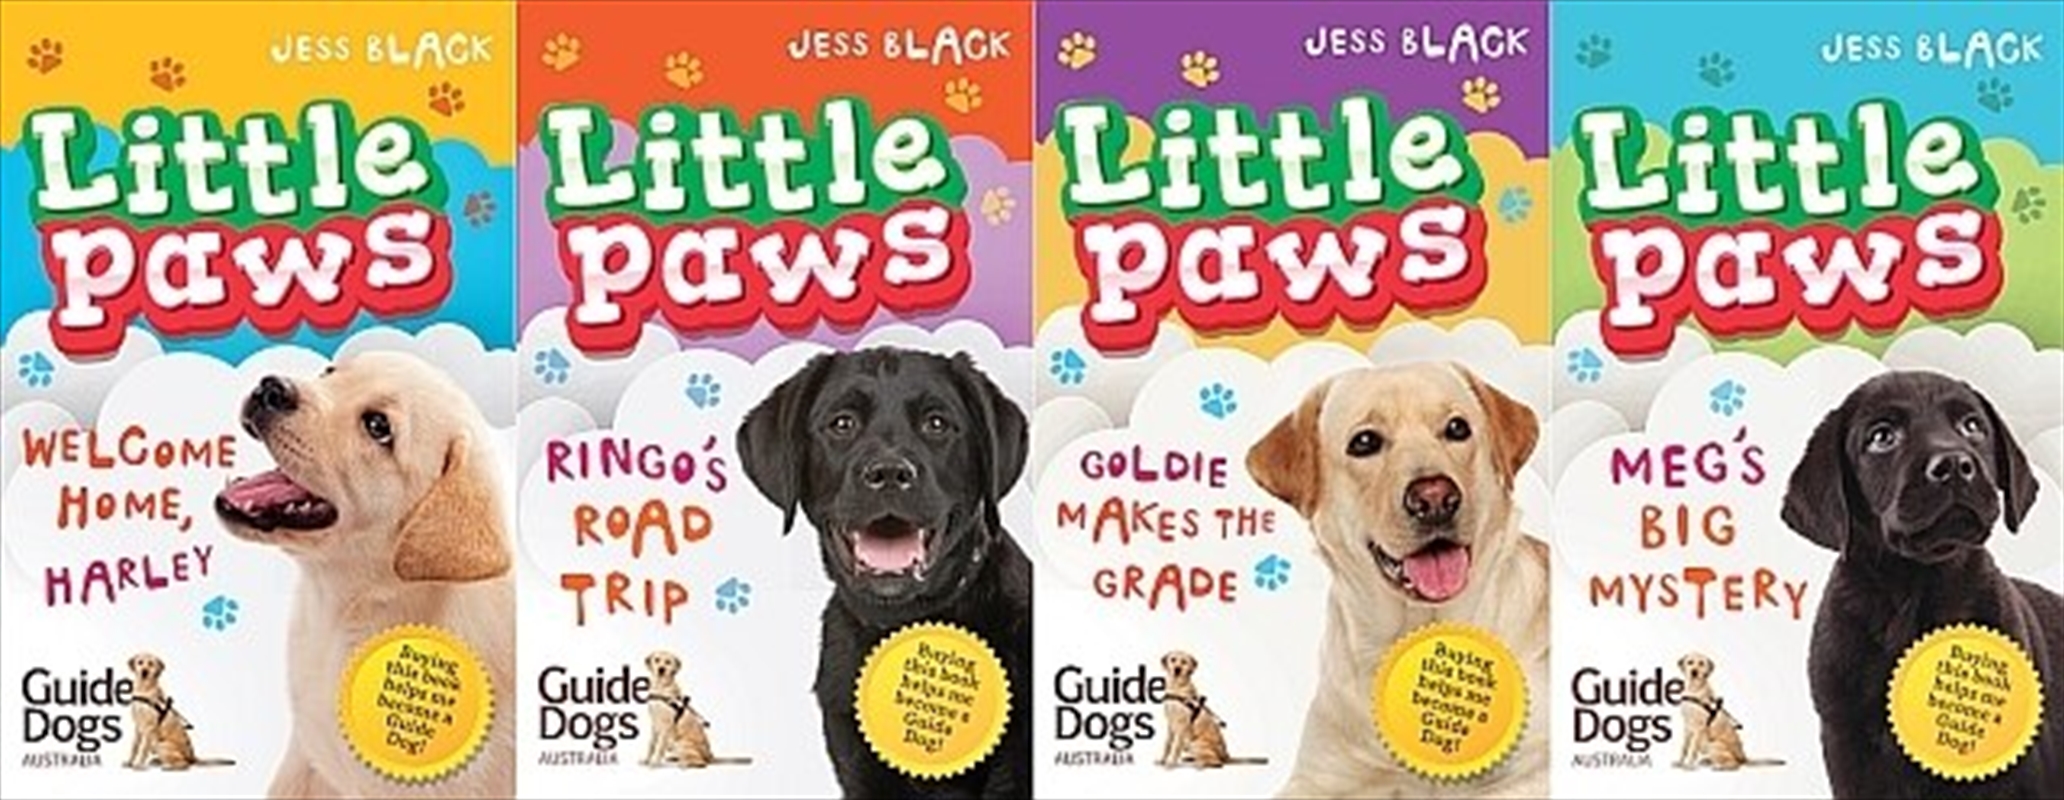 Little Paws X4 2017 Slipcase/Product Detail/Childrens Fiction Books